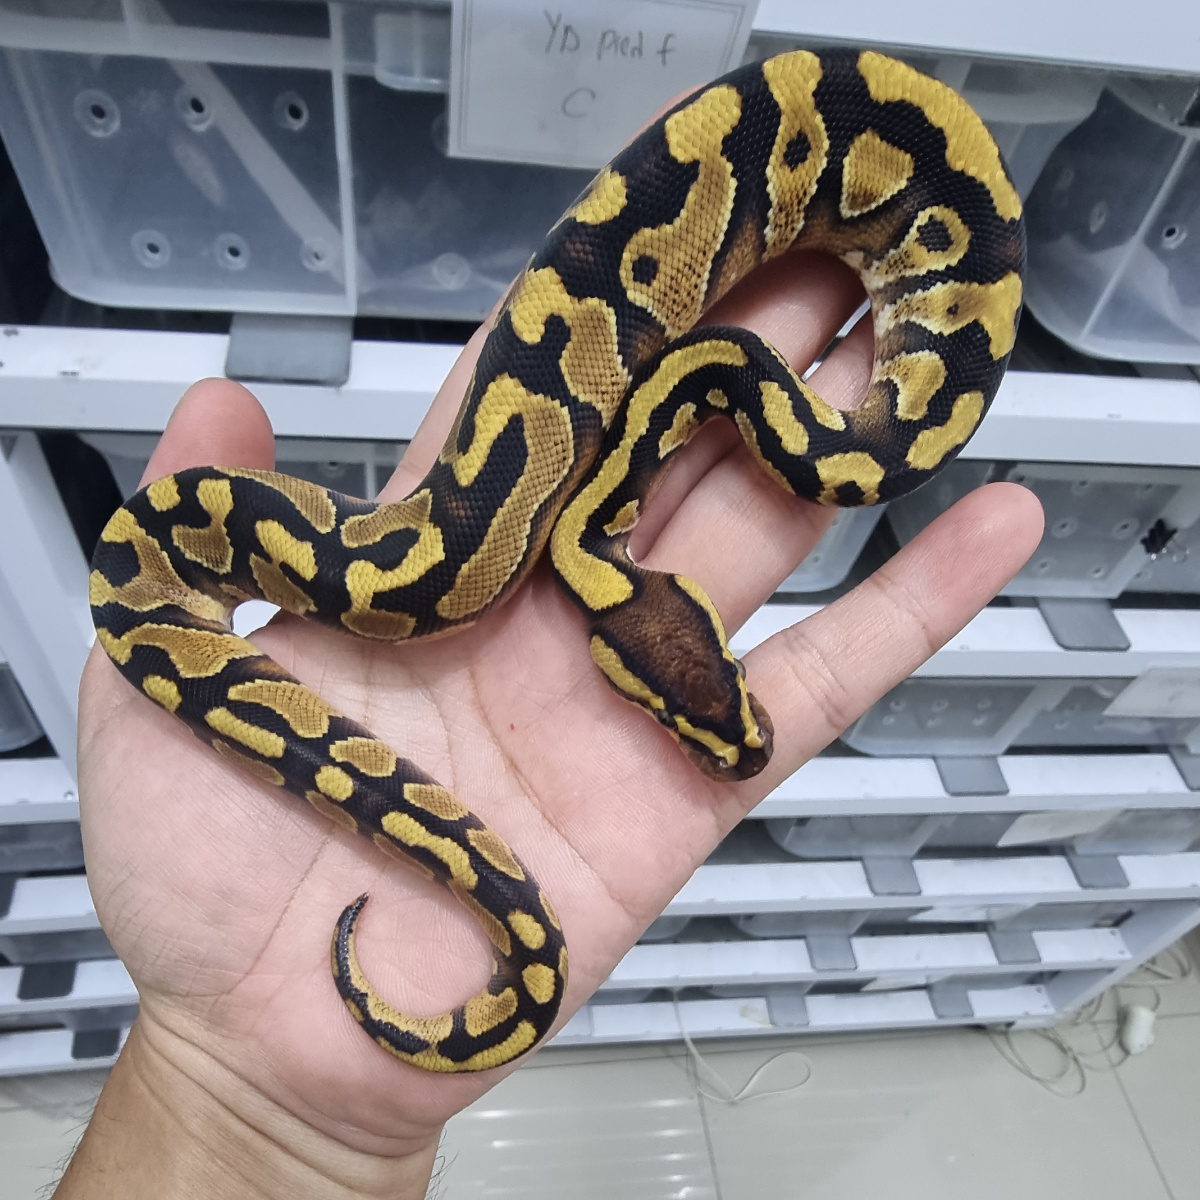 1.0 enchi yellow belly he